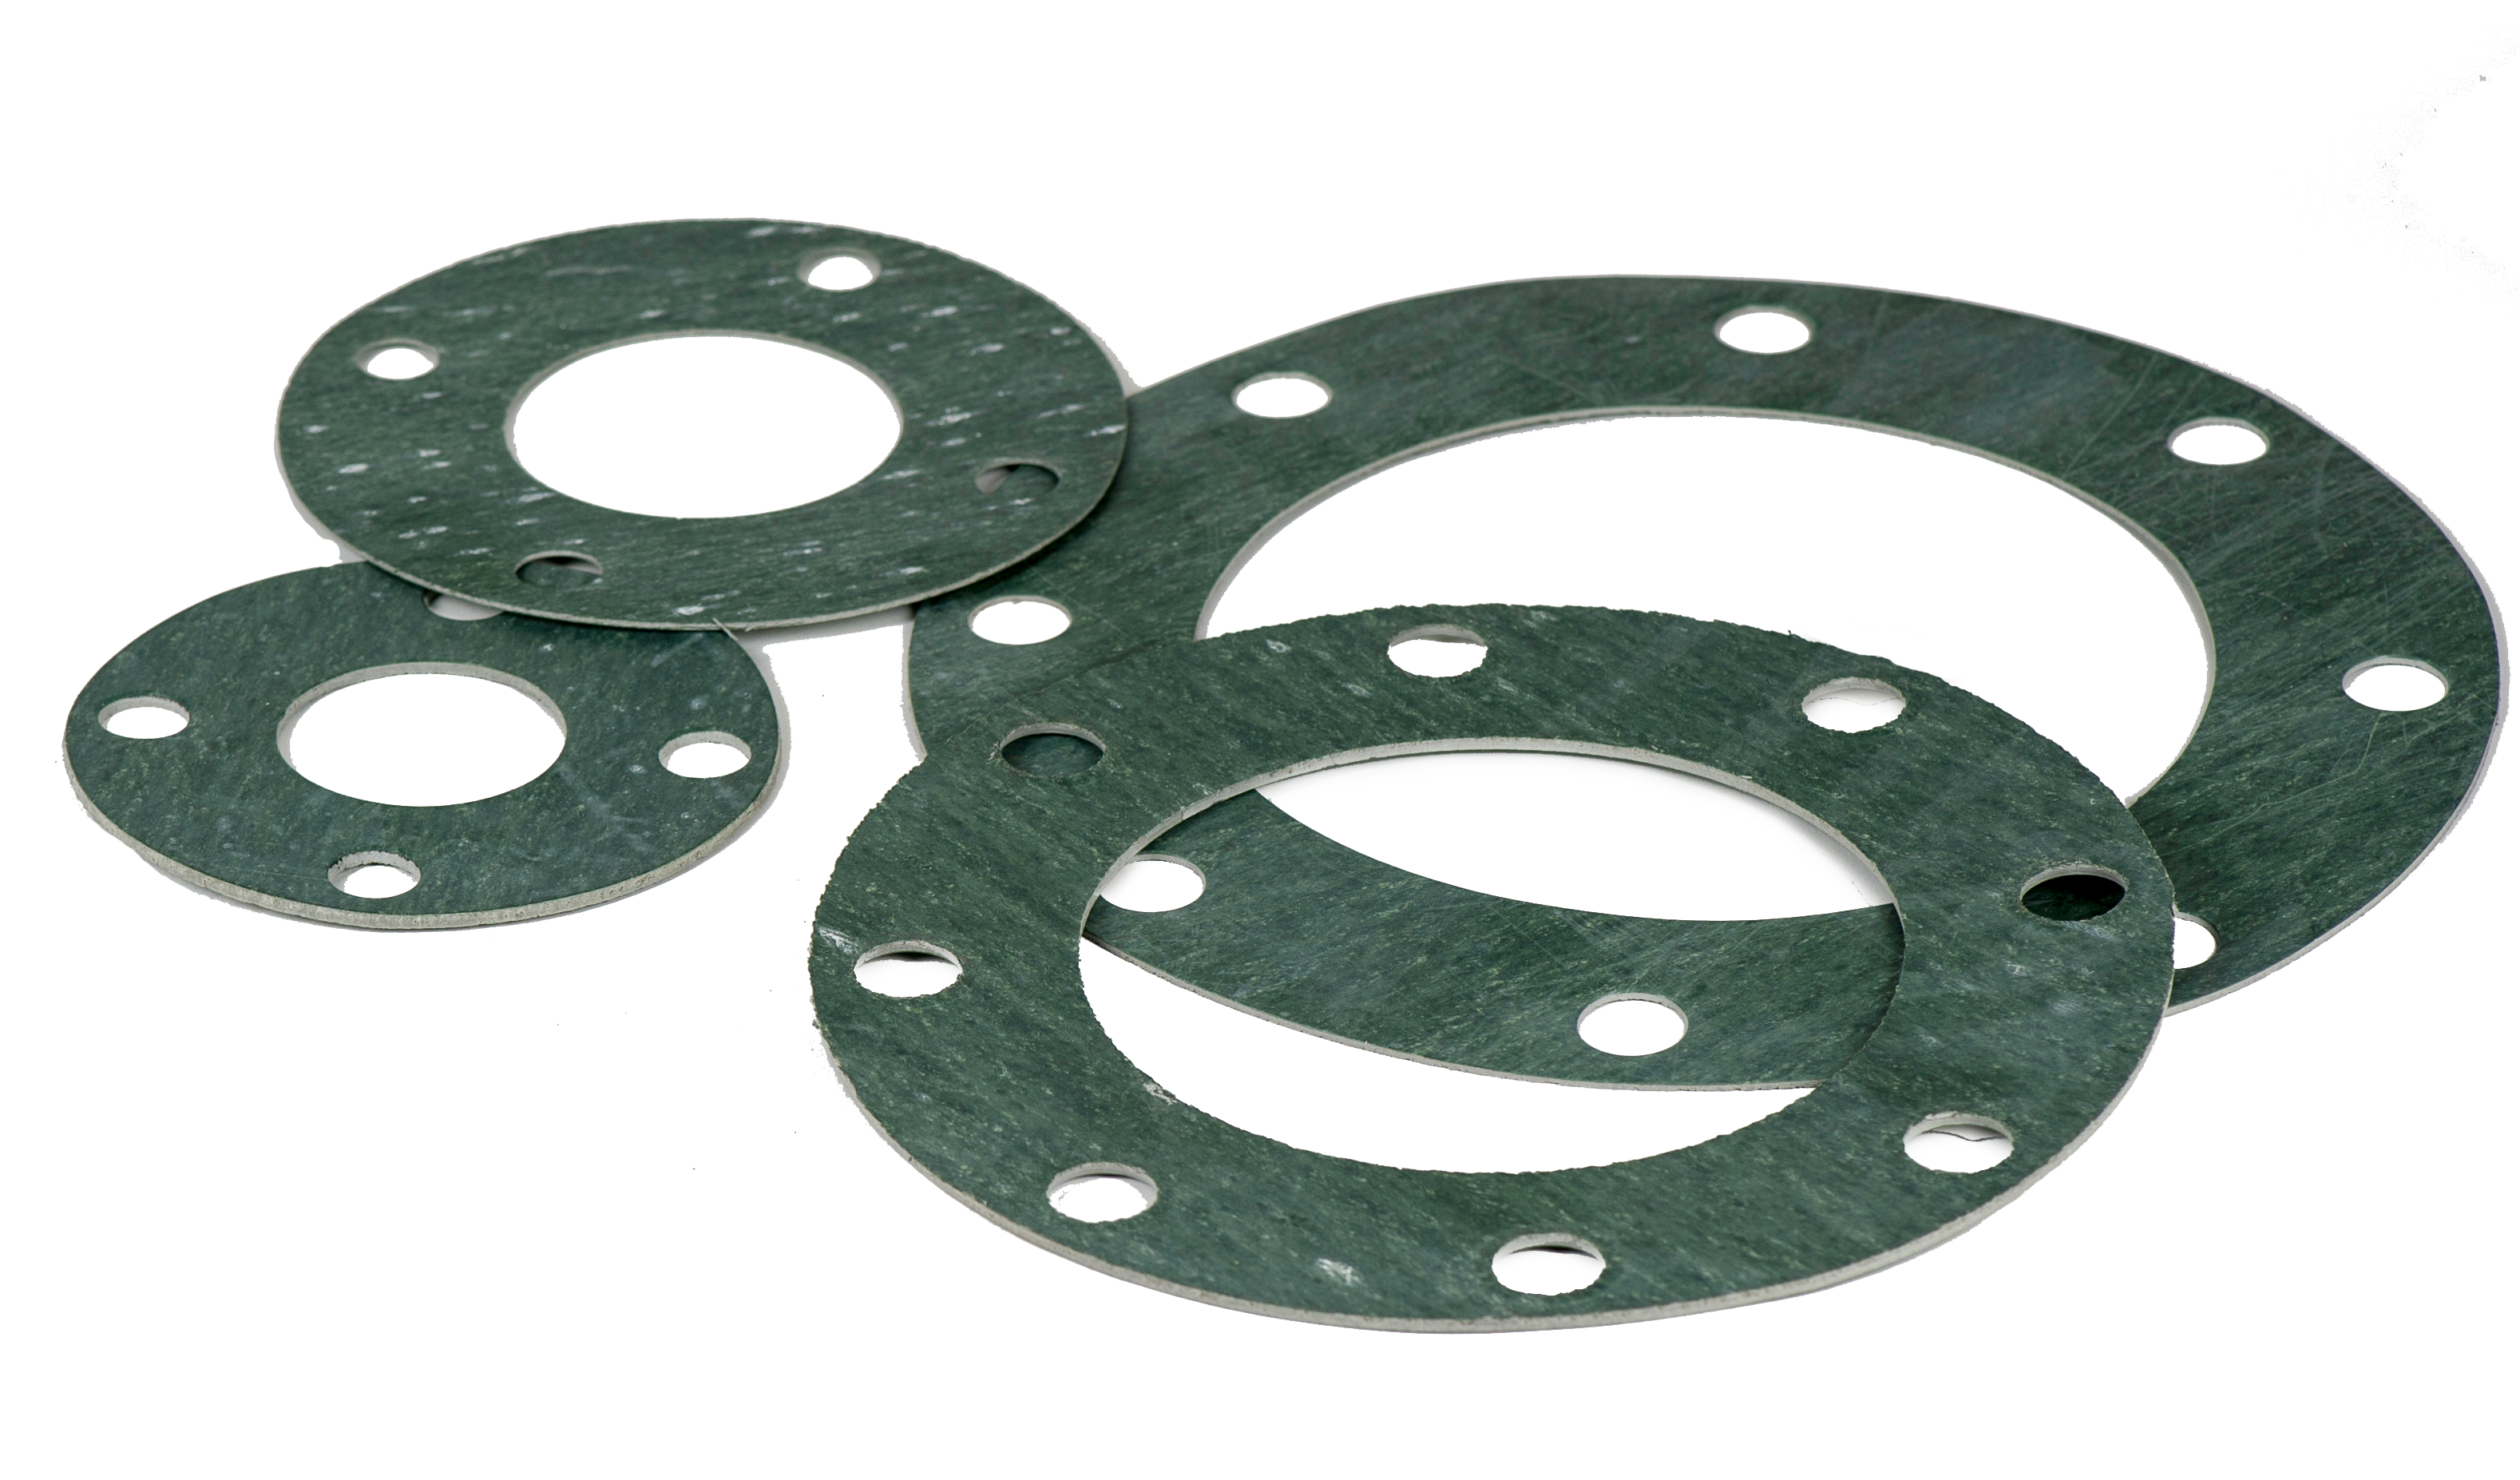 USA Sealing Full Face Viton Rubber Flange Gasket for 6 Pipe Class 150 1/8 Thick 